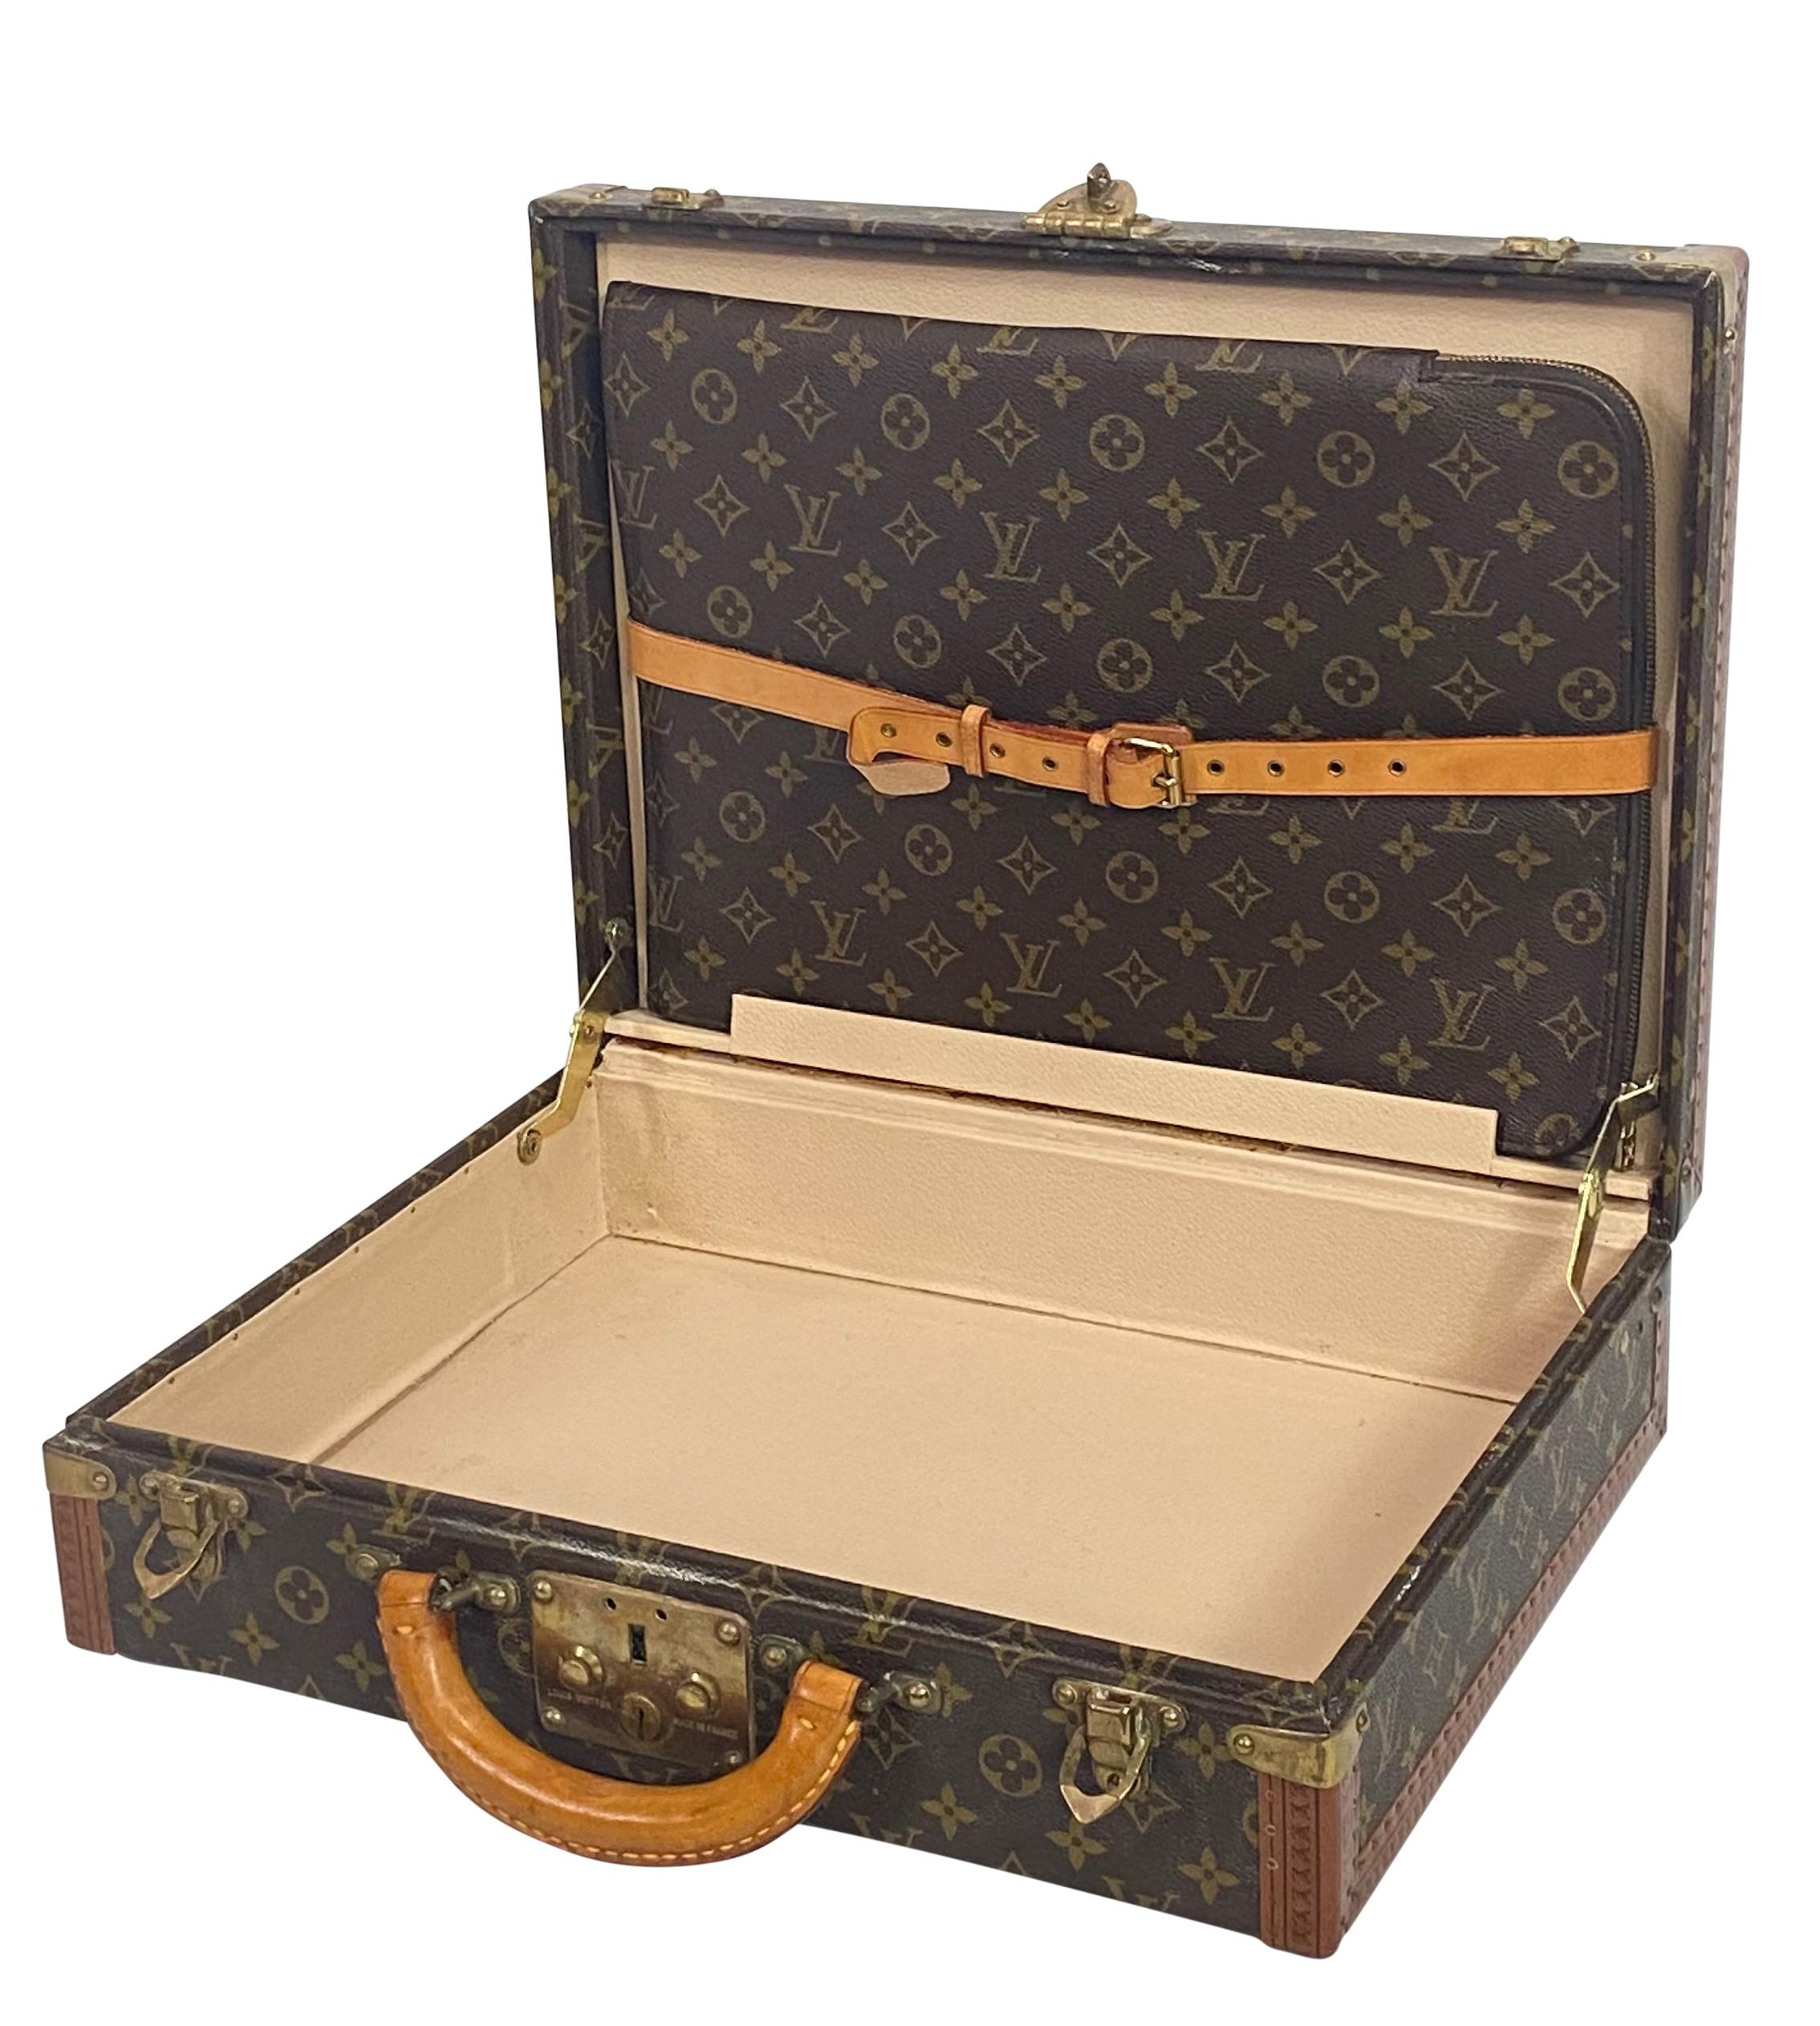 Authentic Vintage Louis Vuitton Suitcase Valise In Good Condition For Sale In San Francisco, CA